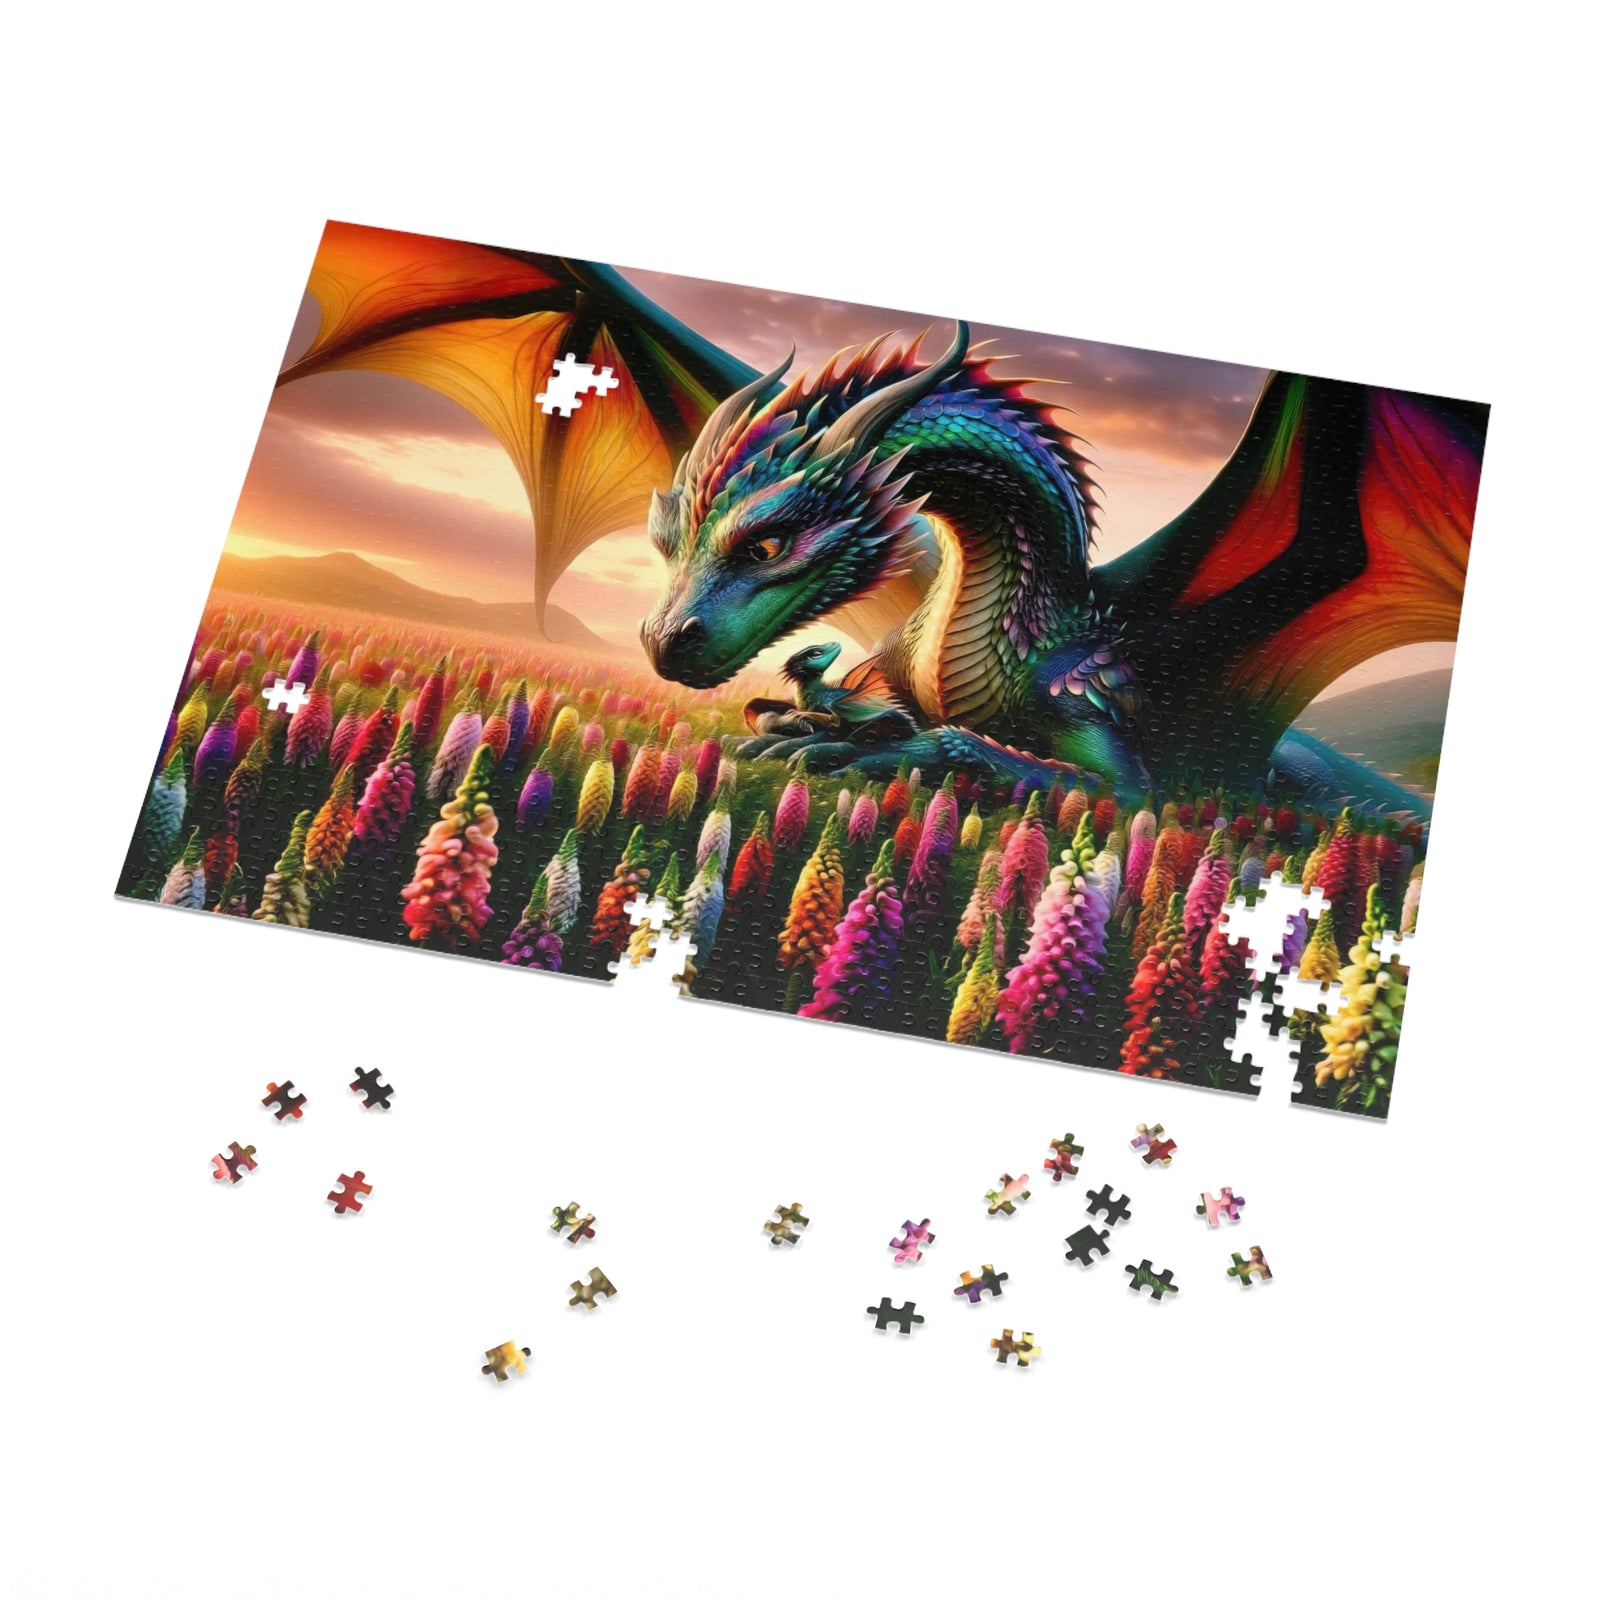 Guardian's Embrace at Snapdragon Vale Jigsaw Puzzle